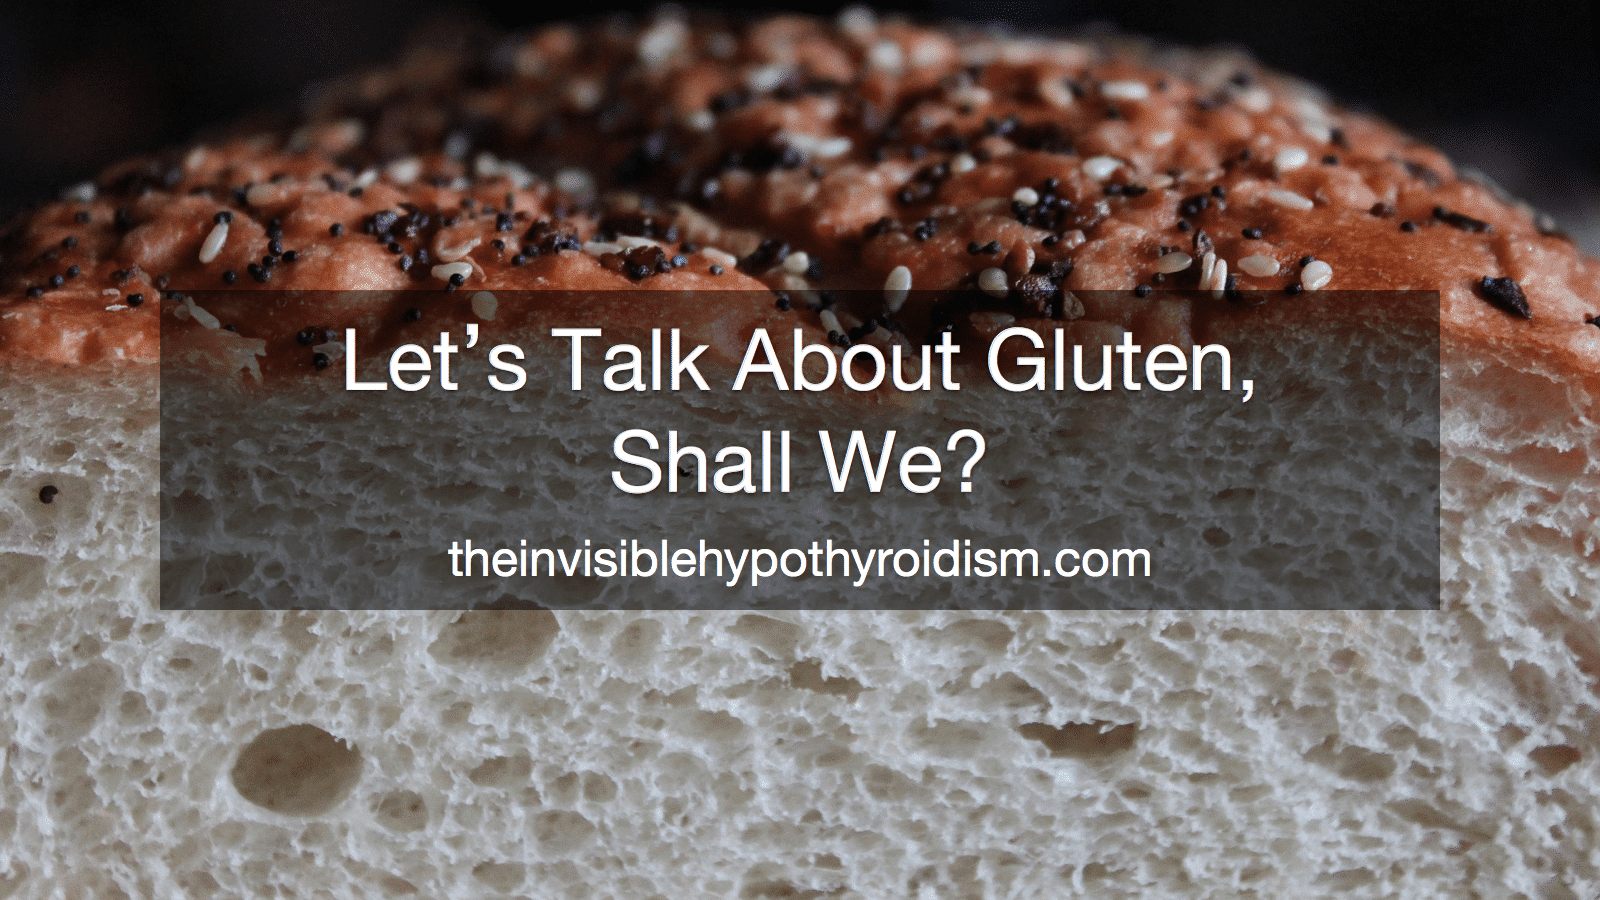 Let’s Talk About Gluten, Shall We?